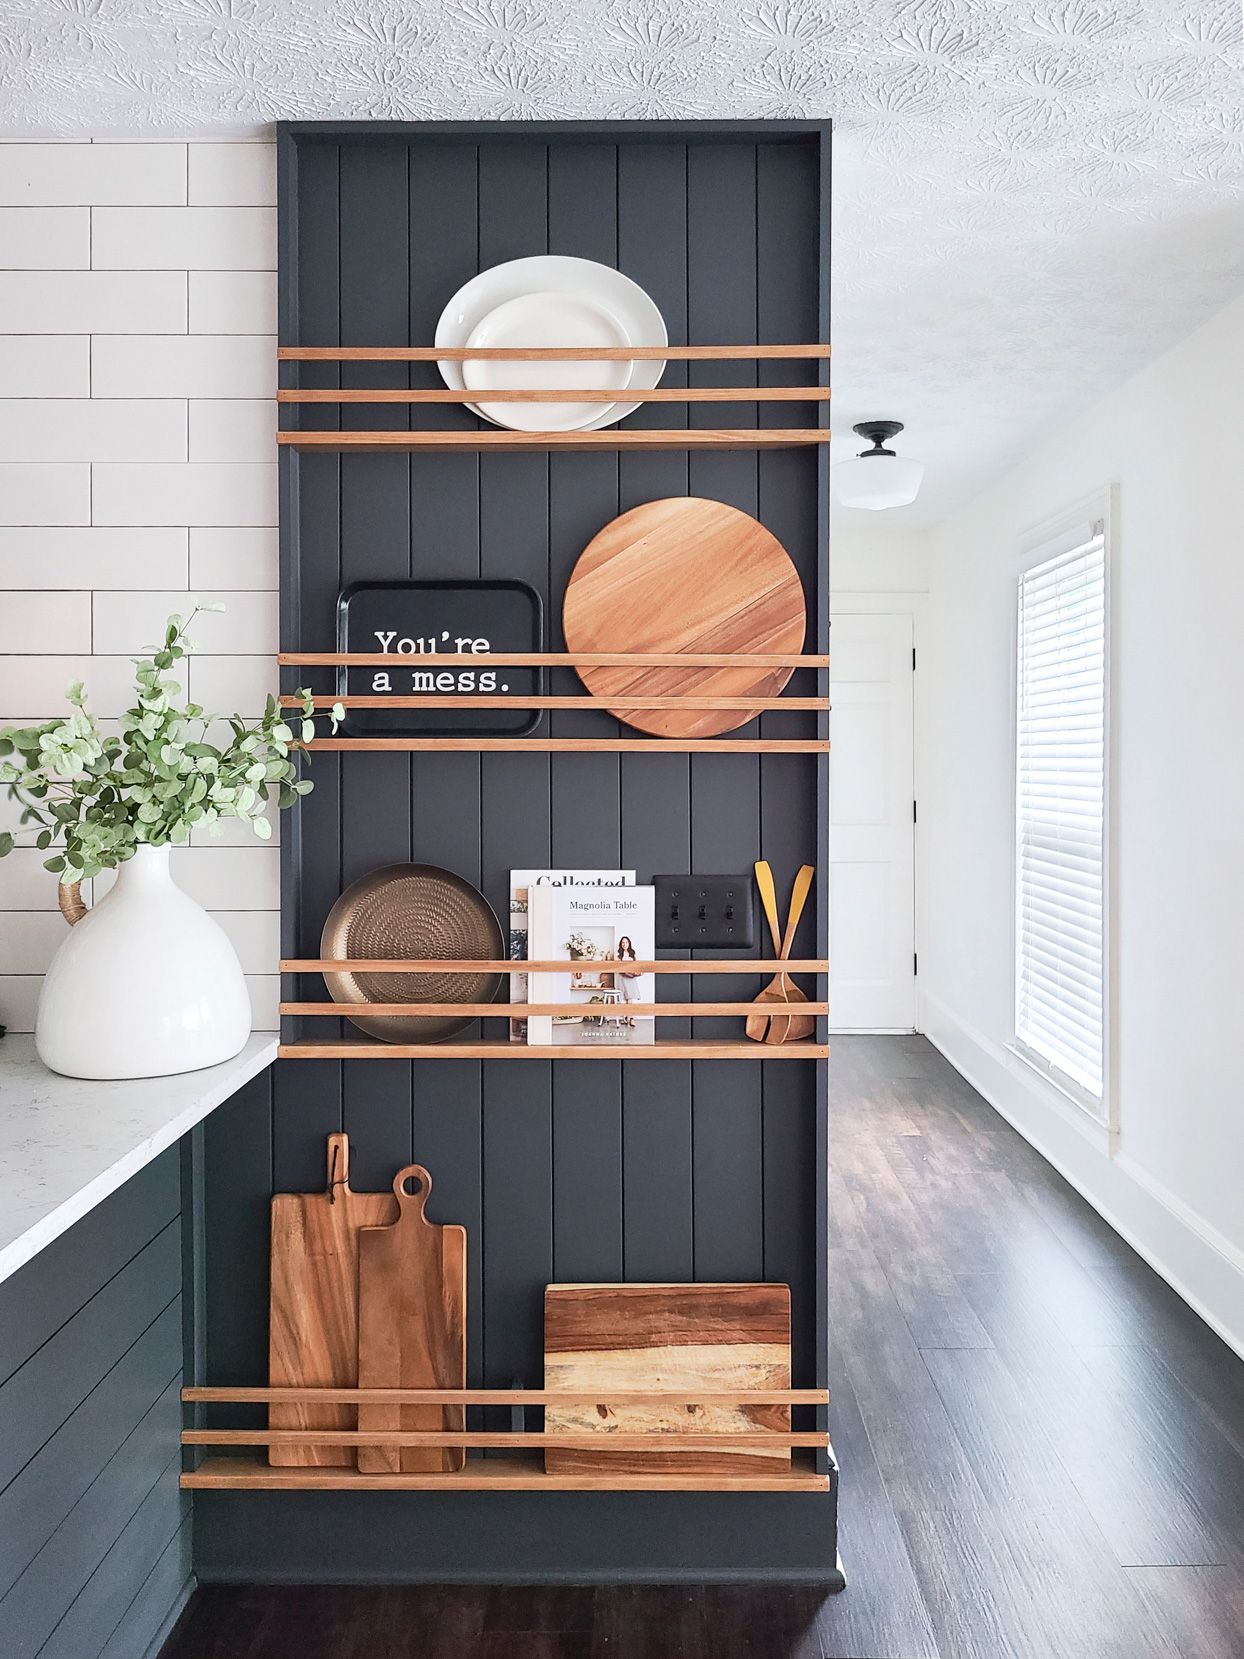 Kitchen shelving ideas – 14 ways to boost storage and display space